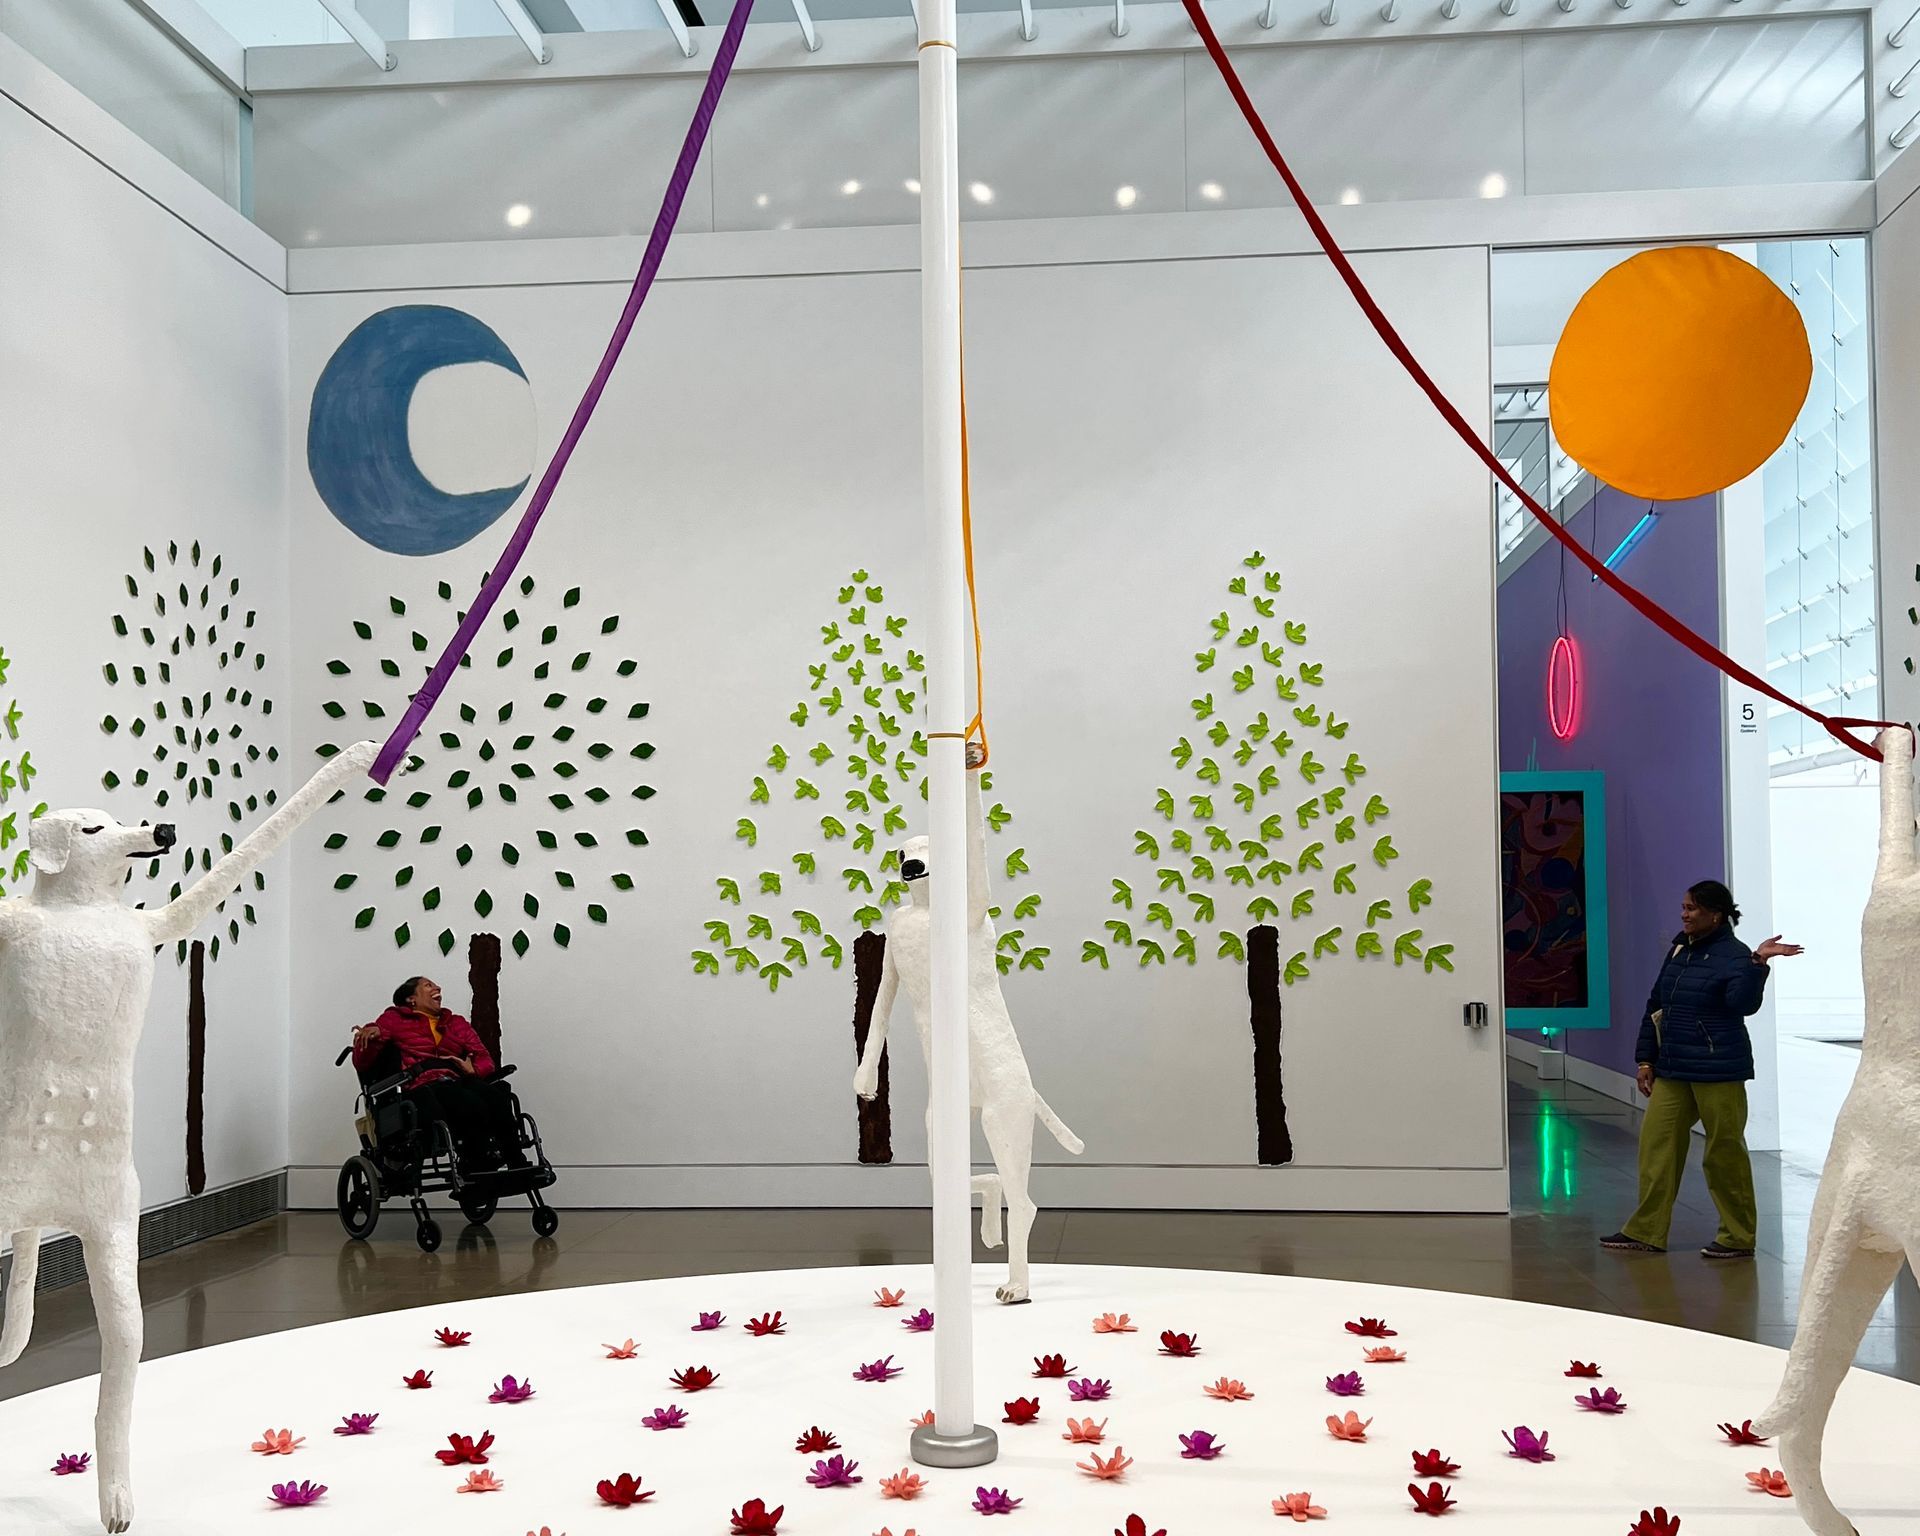 In the photo we took, the art installation sits within a bright, modern gallery space. At the center is a white circular platform adorned with numerous colorful flowers arrayed in shades of red, pink, and burgundy. Long ribbons in purple and red drape from the ceiling, converging on a single white pole—a symbolic white cane—at the circle's center. Three white dog figures, sculpted in a human-like form, are positioned around the platform. They interact with the pole and ribbons in what appears to be a dynamic and possibly celebratory fashion, injecting life into the scene. The wall art around the installation features stylized trees with leaves in shades of dark and light green, a blue crescent moon, and a full orange circle representing the sun. The ambiance is one of serenity, with the installation drawing viewers into its playful and colorful space.